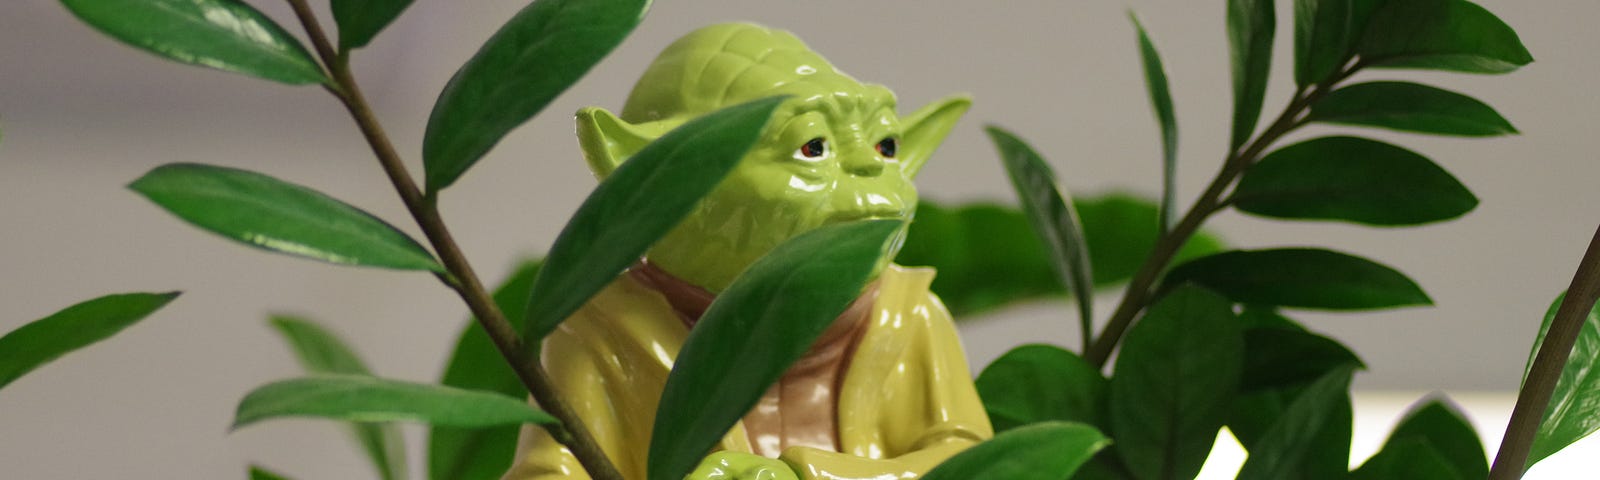 A tiny model of Star Wars’Yoda character stands peeping through a jungle of leaves.